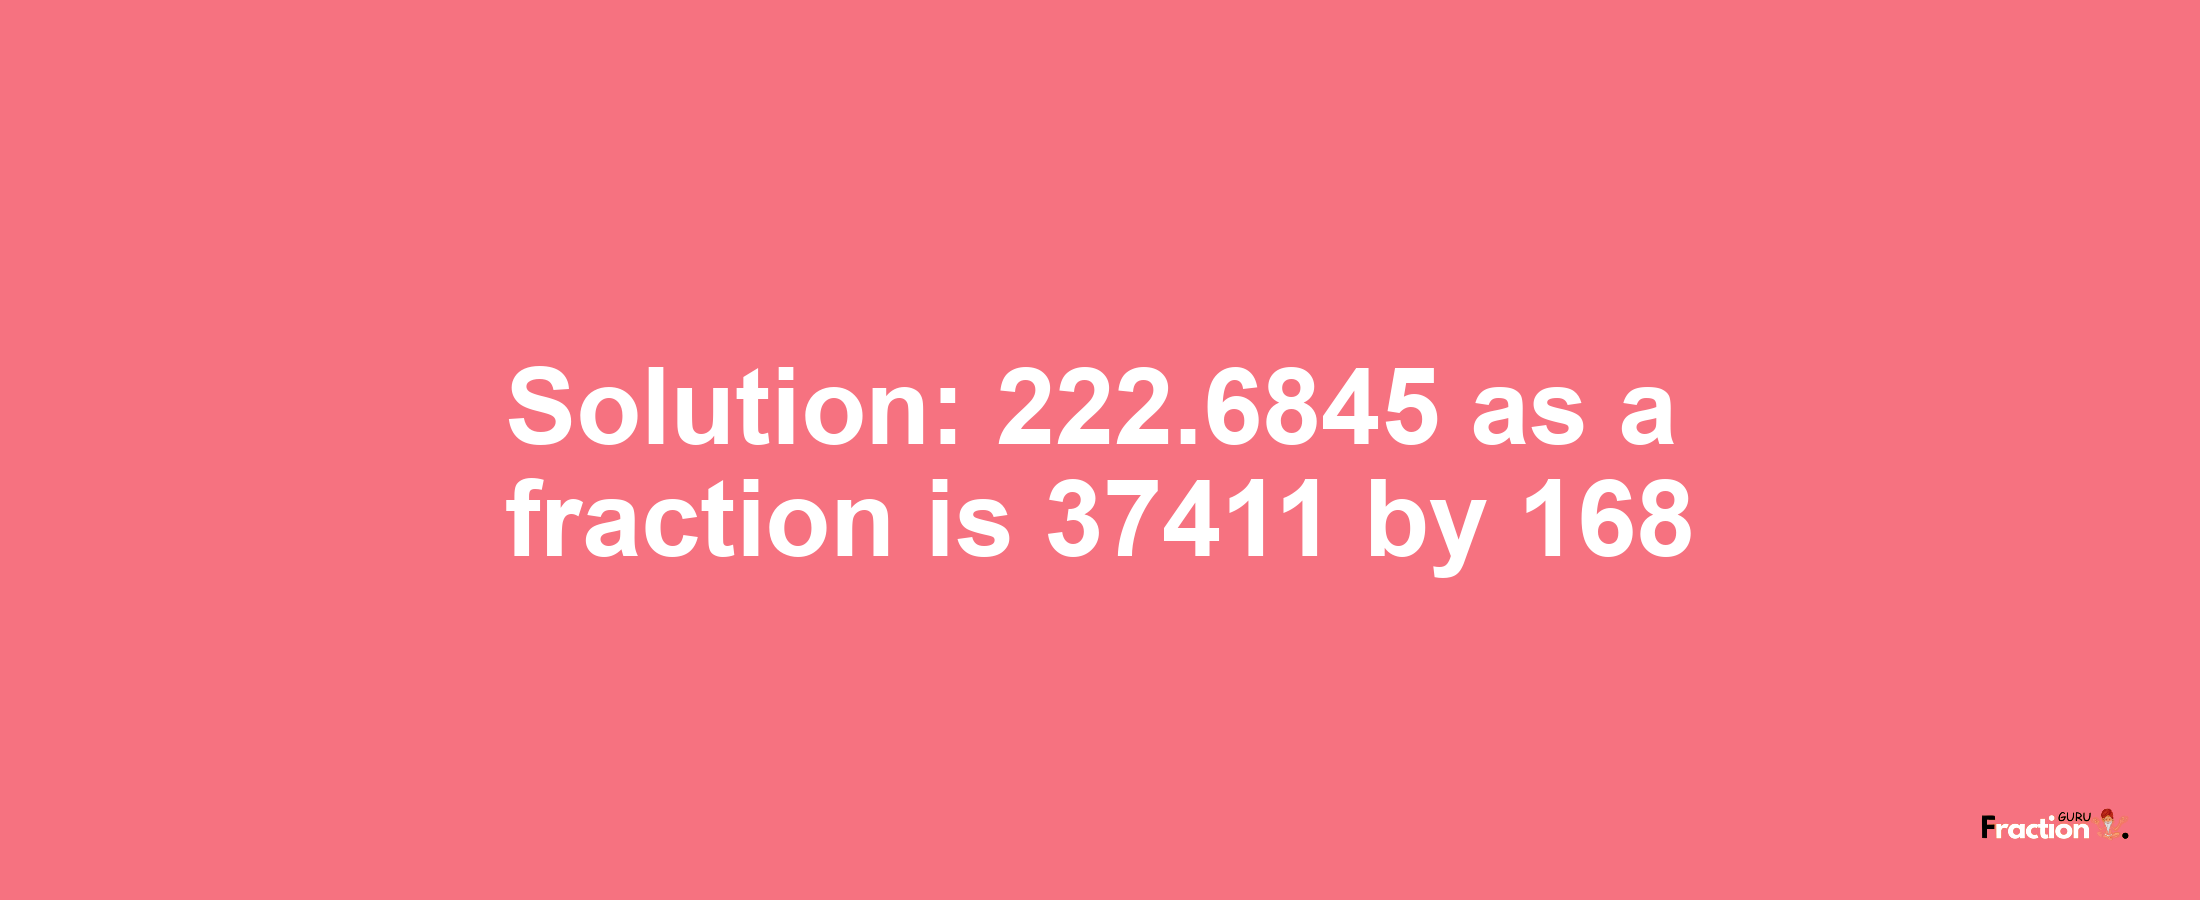 Solution:222.6845 as a fraction is 37411/168